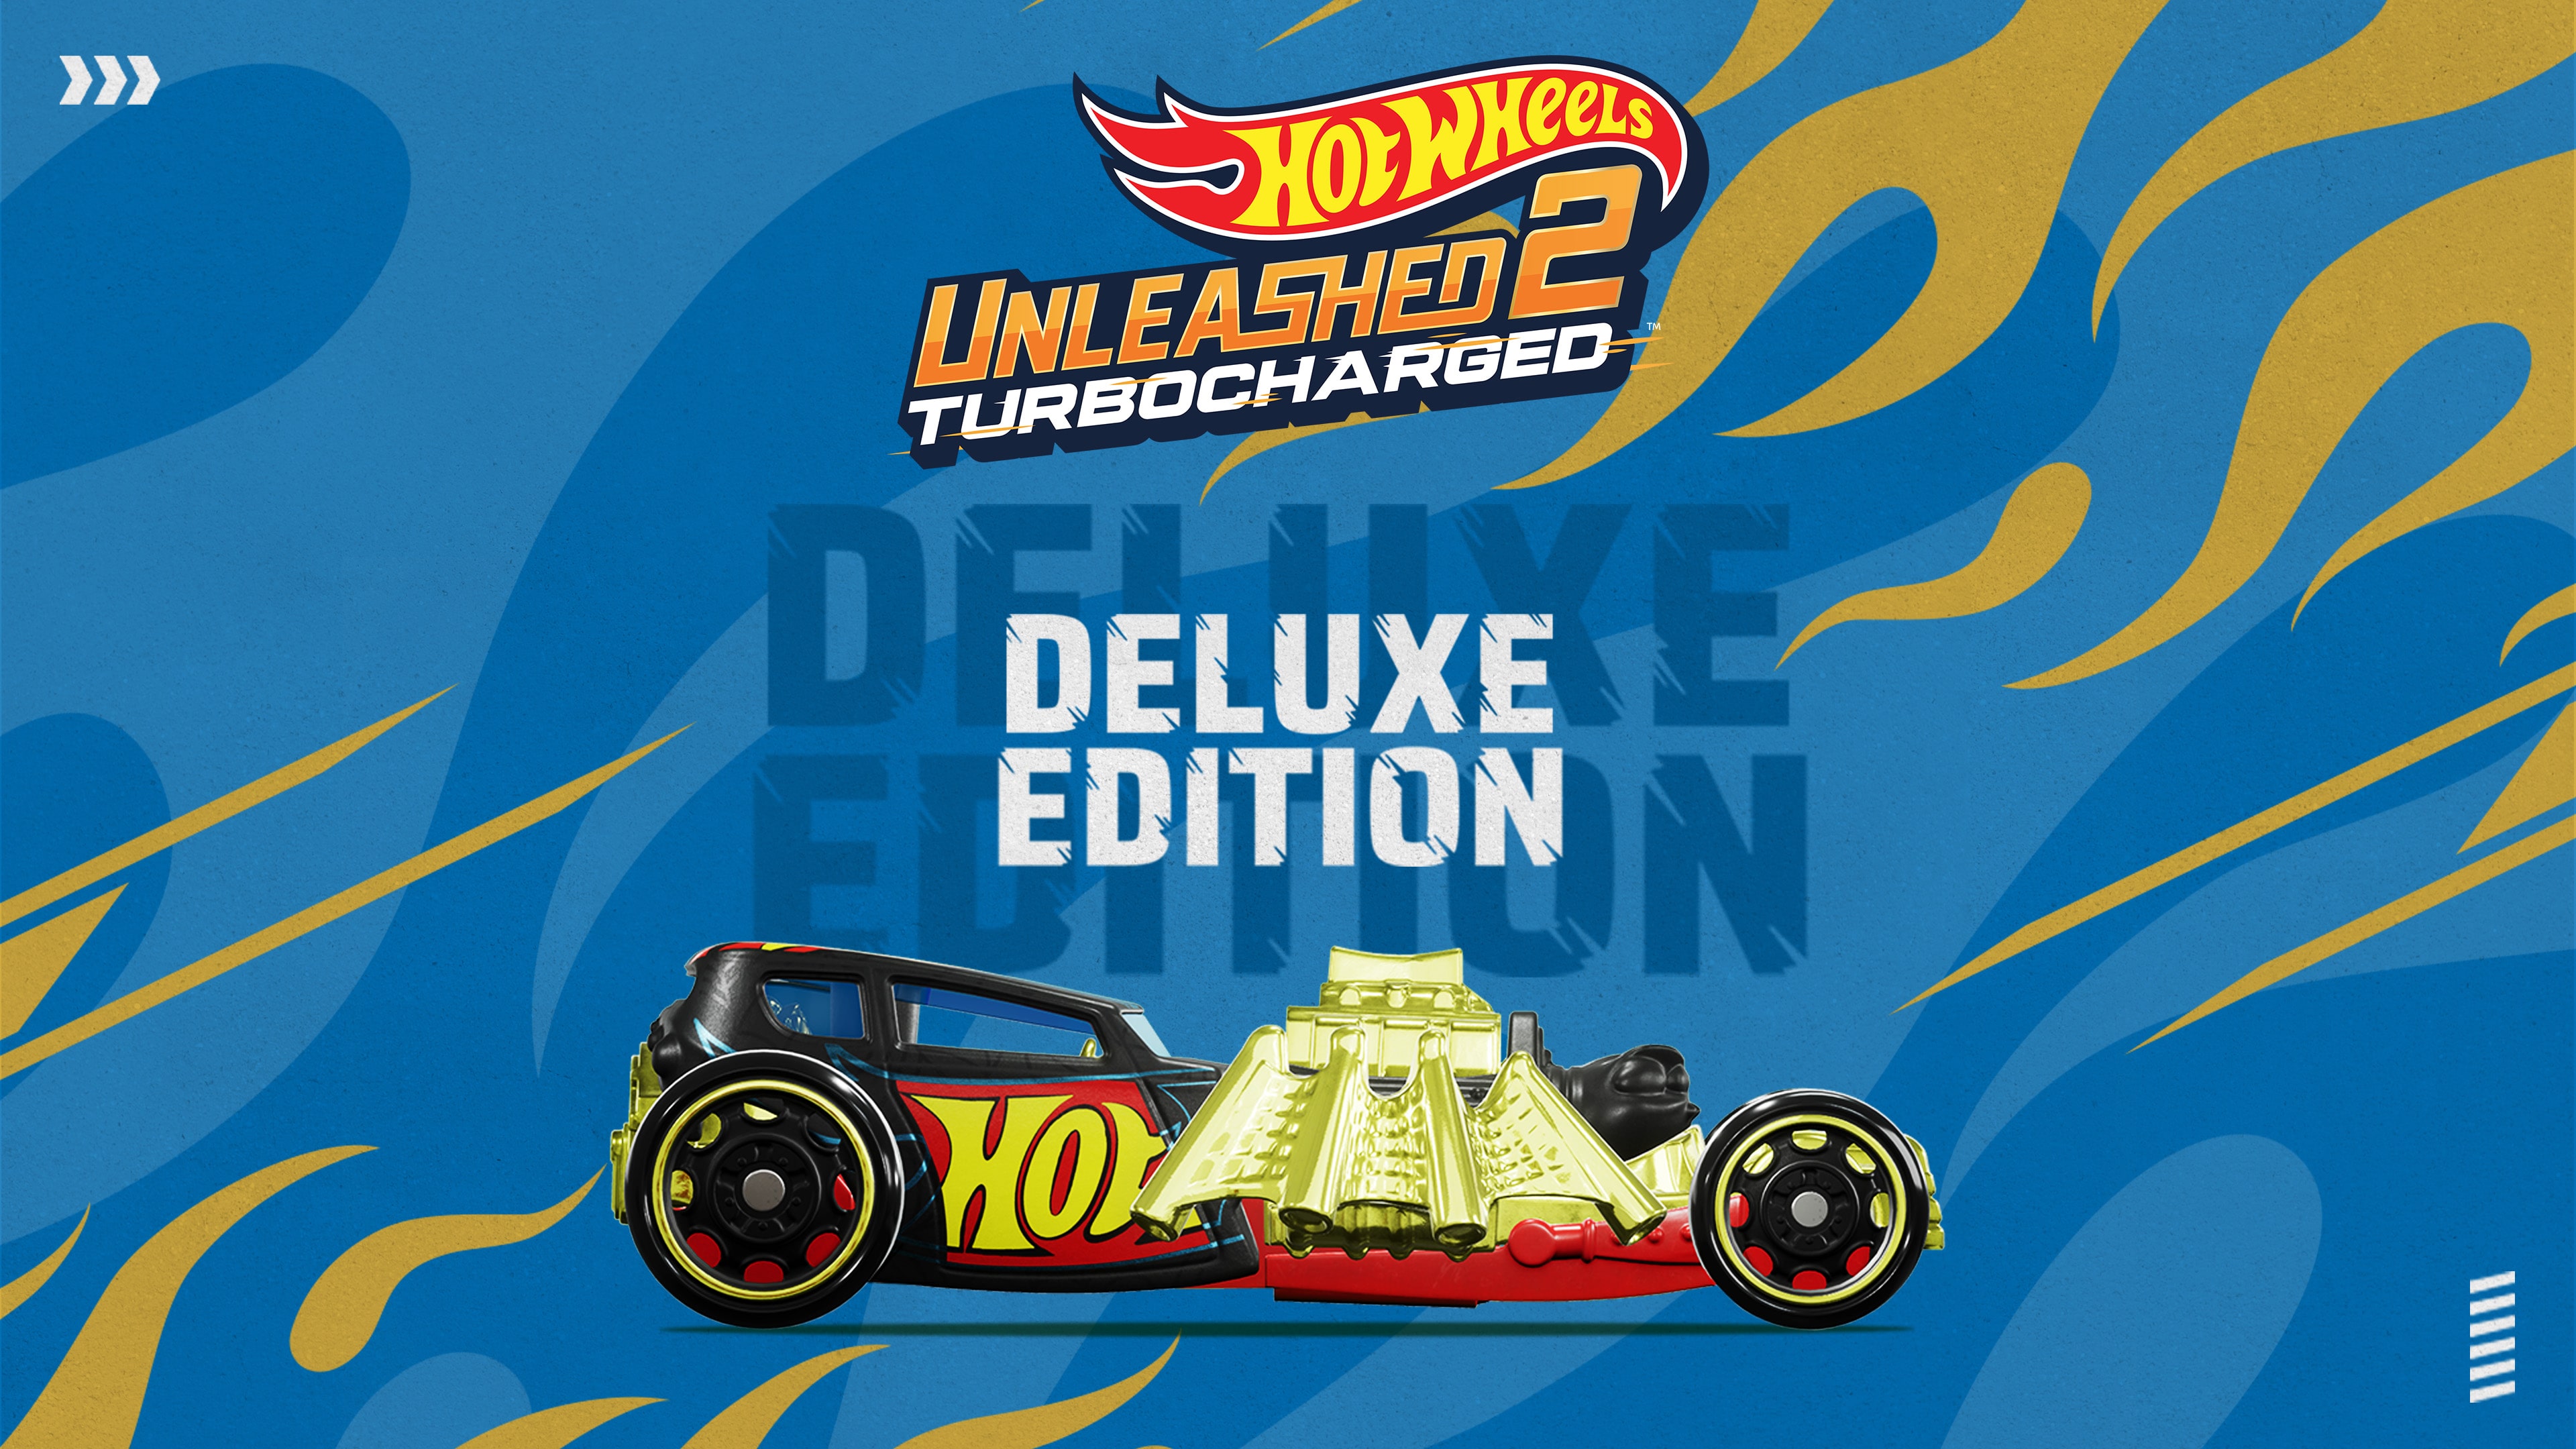 HOT WHEELS UNLEASHED™ 2 - Edition PS5 Deluxe Turbocharged PS4 - 